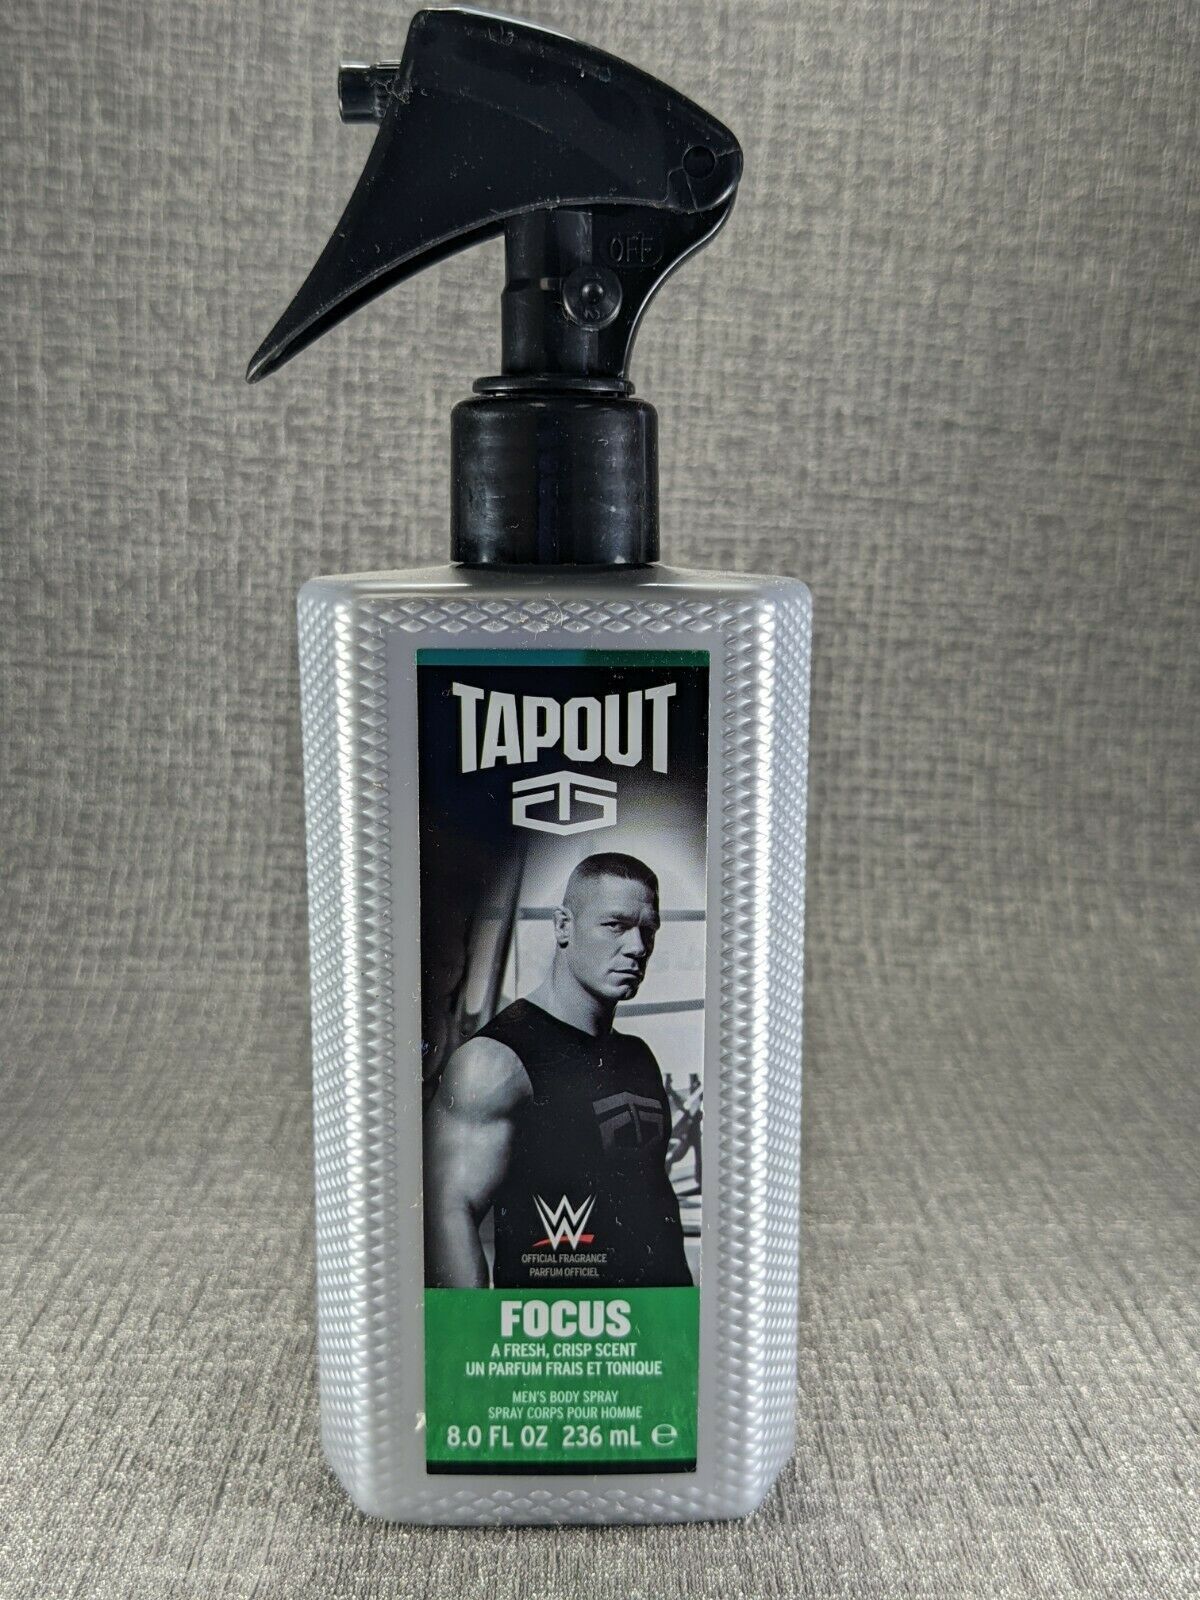 Primary image for Tapout FOCUS for Men Body Spray 8.0 oz (236 ml) NEW Fresh Crisp Scent. NWOB